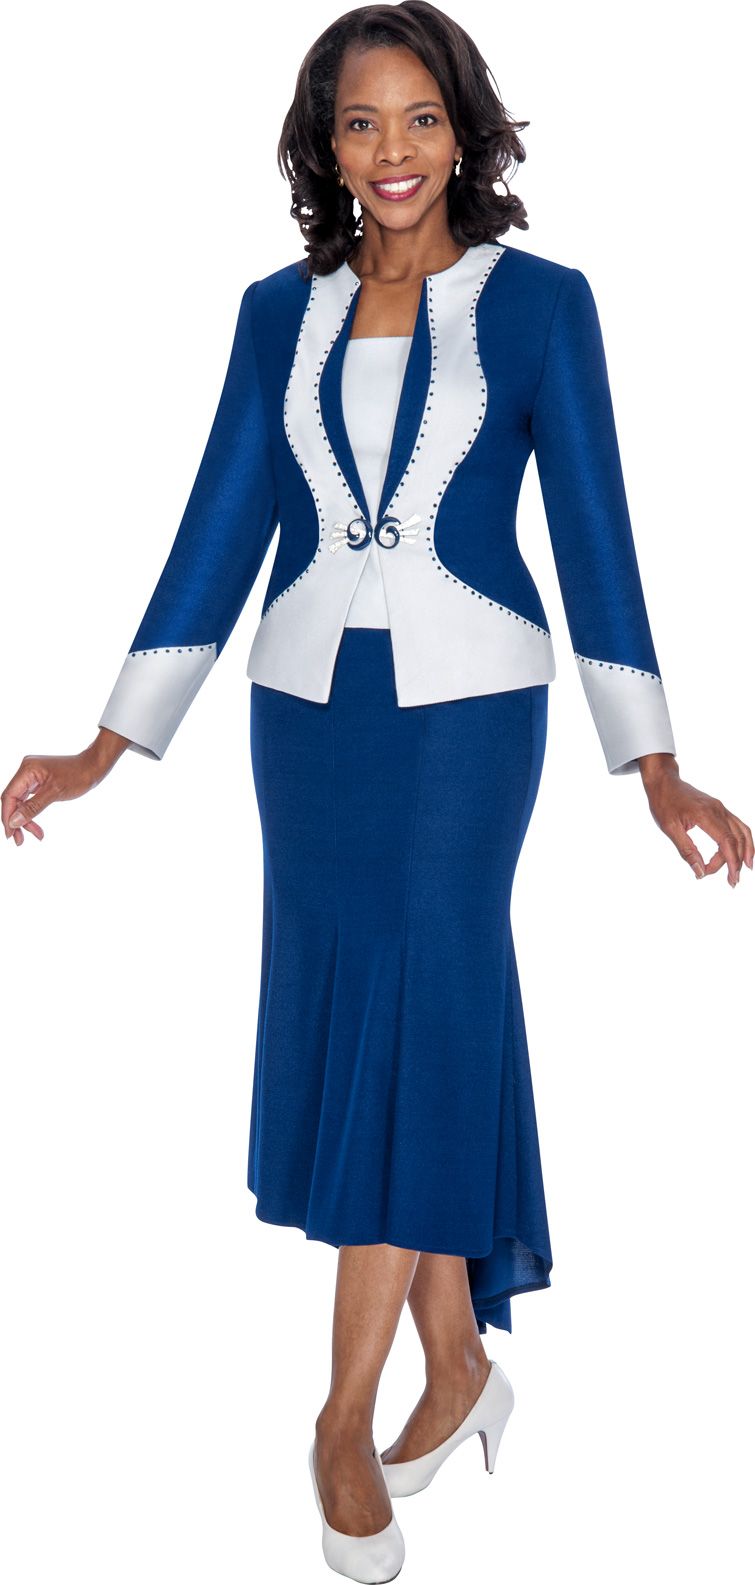 Gmi Gk5462 Womens Knit Church Suit: French Novelty